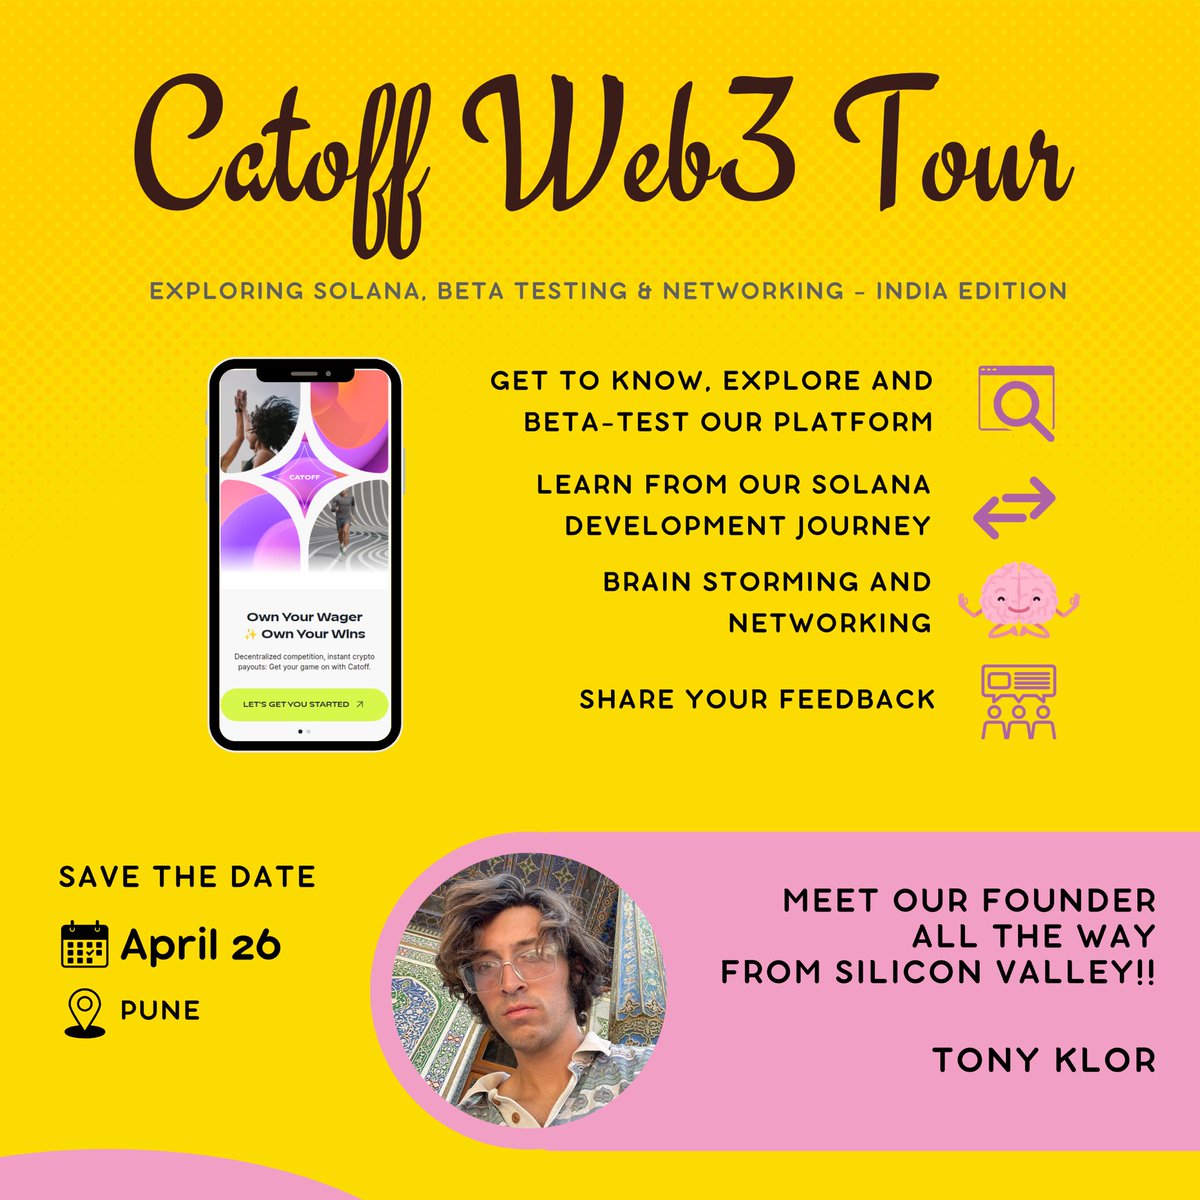 🌟Pune, are you ready to level up?🚀

Join us at the Catoff Web3 Tour: Pune Edition for an adventure into Solana, crypto gaming, and more! Be part of the future. Secure your spot now and let's make waves in the web3 world!
lu.ma/yxyehber

#CatoffWeb3Tour #CatoffPuneEvent